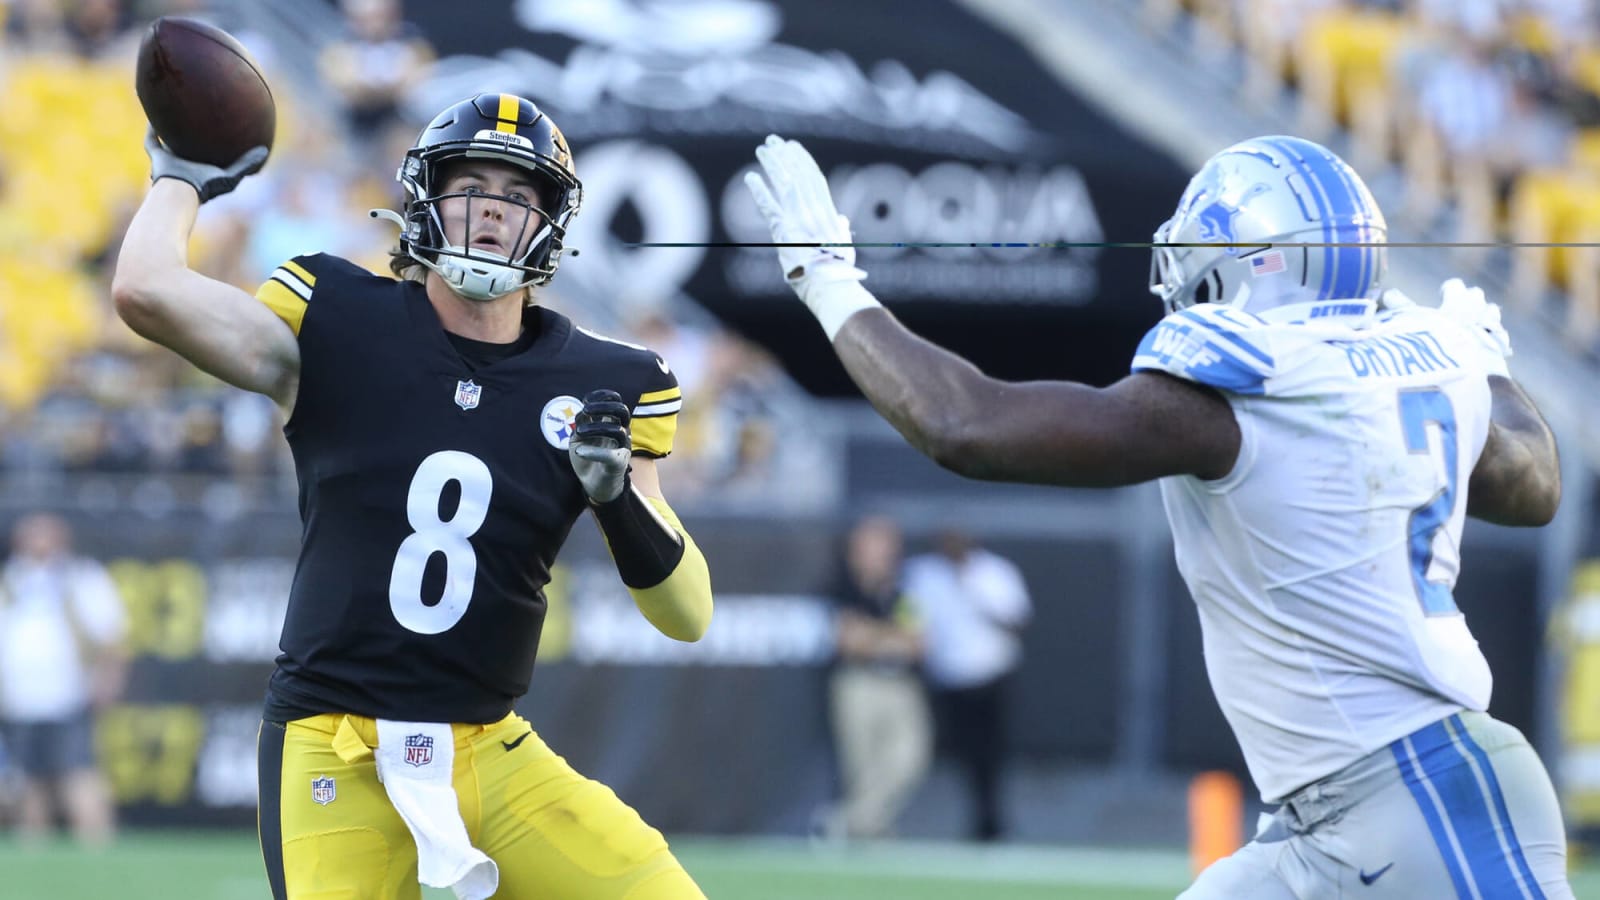 Should the Steelers Start Rookie QB Kenny Pickett in 2022 if the Other Side of the Ball Remains Lackluster?